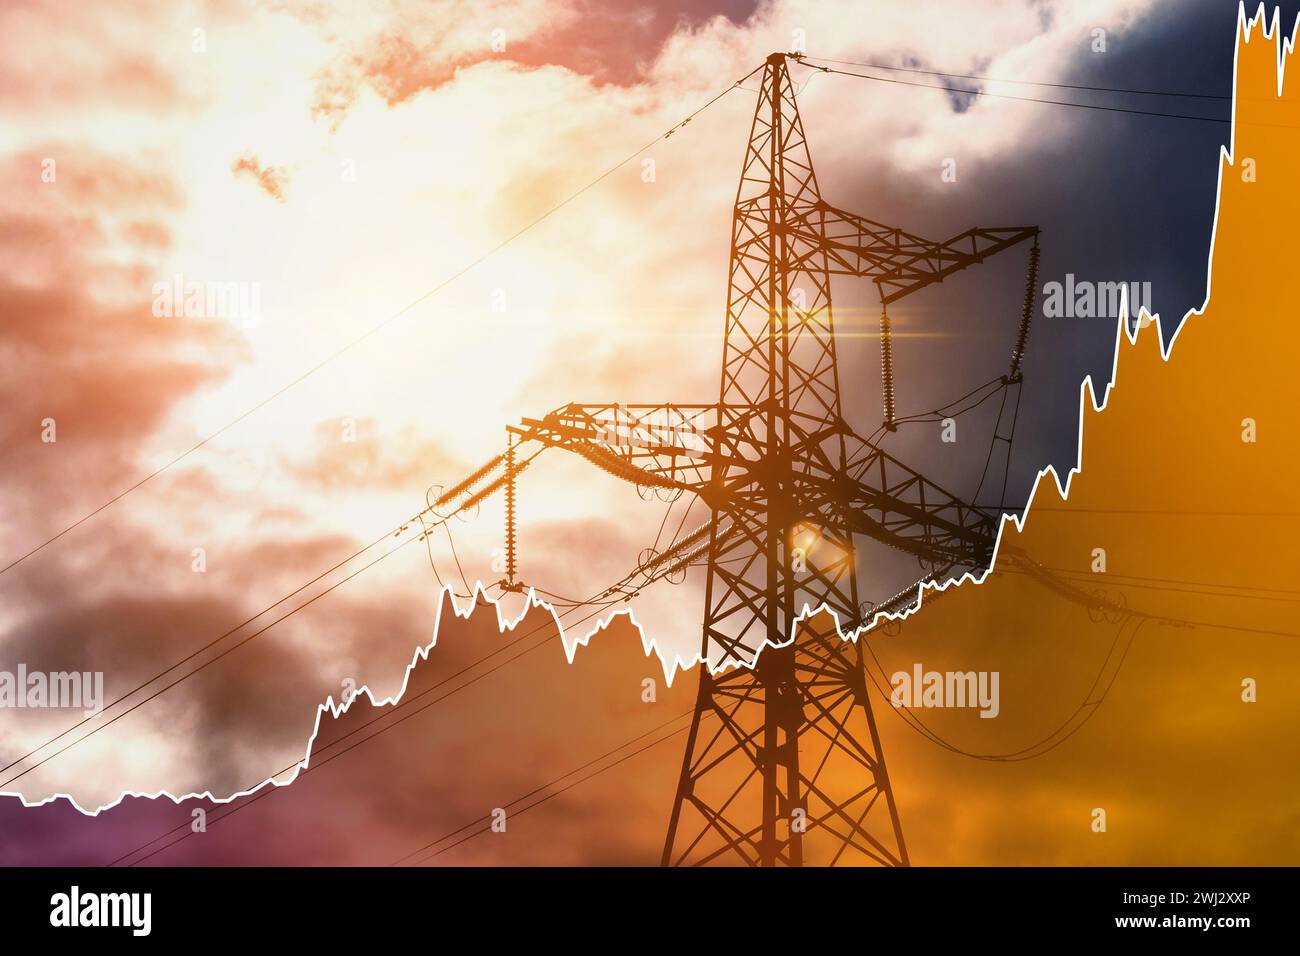 Transmission tower and raising sparkline chart representing electricity prices rise Stock Photo